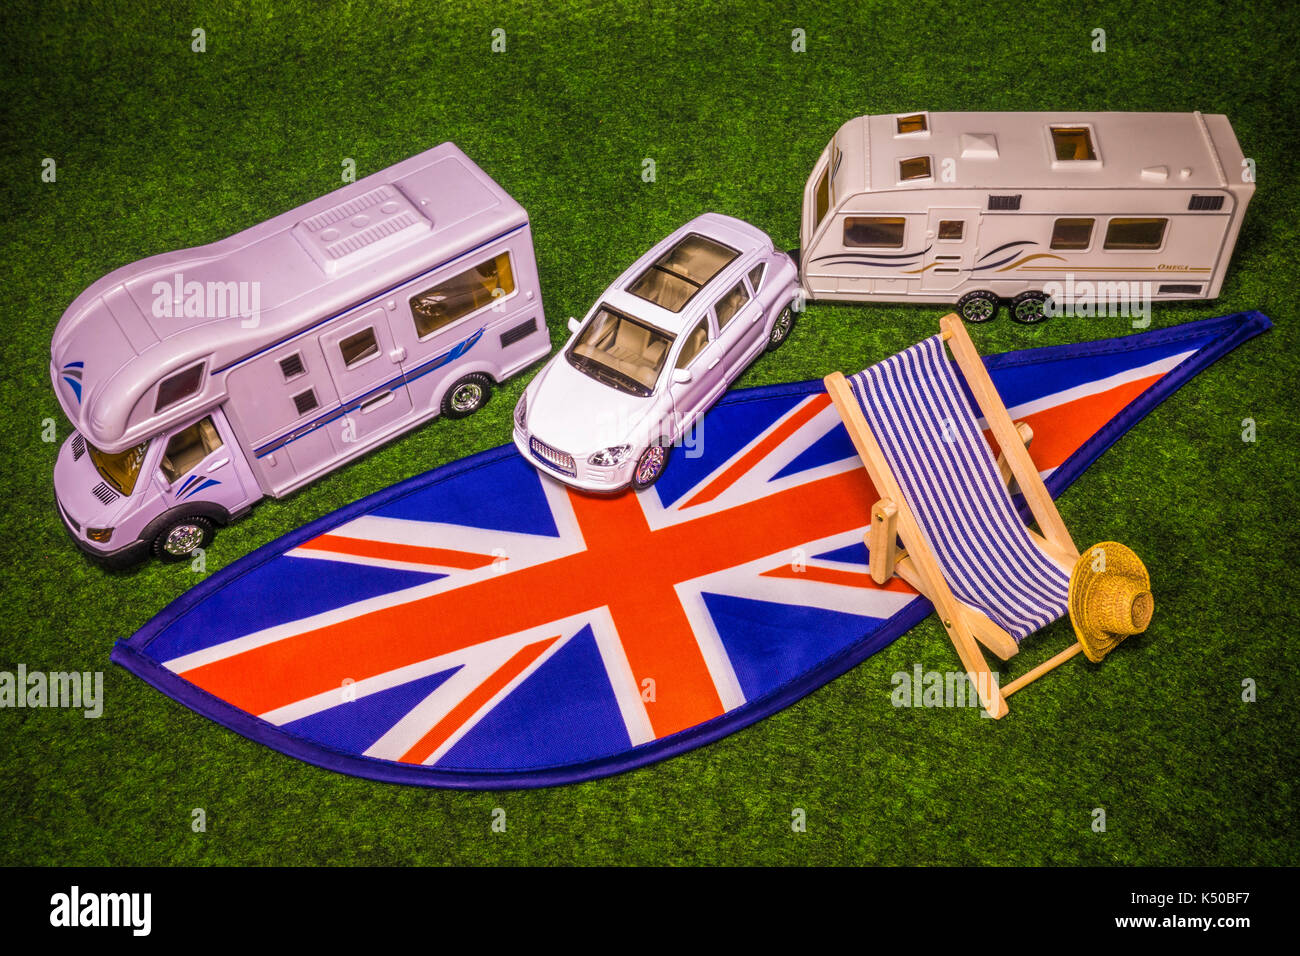 A model motorhome, car with caravan, deckchair and straw hat, on Union Jack colours. Concept of a UK motorhome or caravanning holiday or tour. Stock Photo